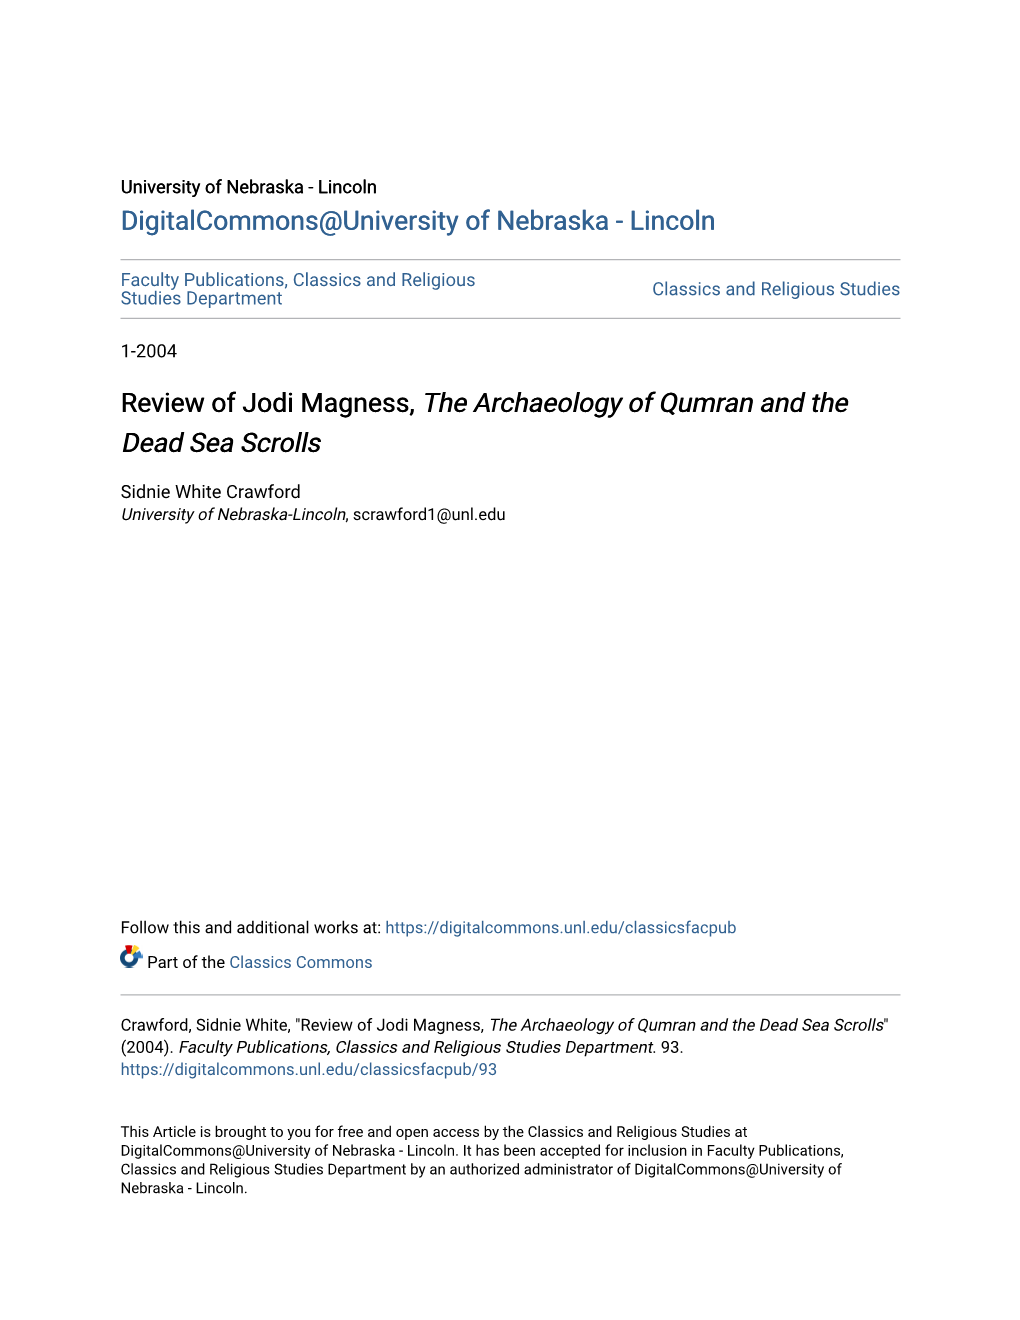 Review of Jodi Magness, the Archaeology of Qumran and the Dead Sea Scrolls